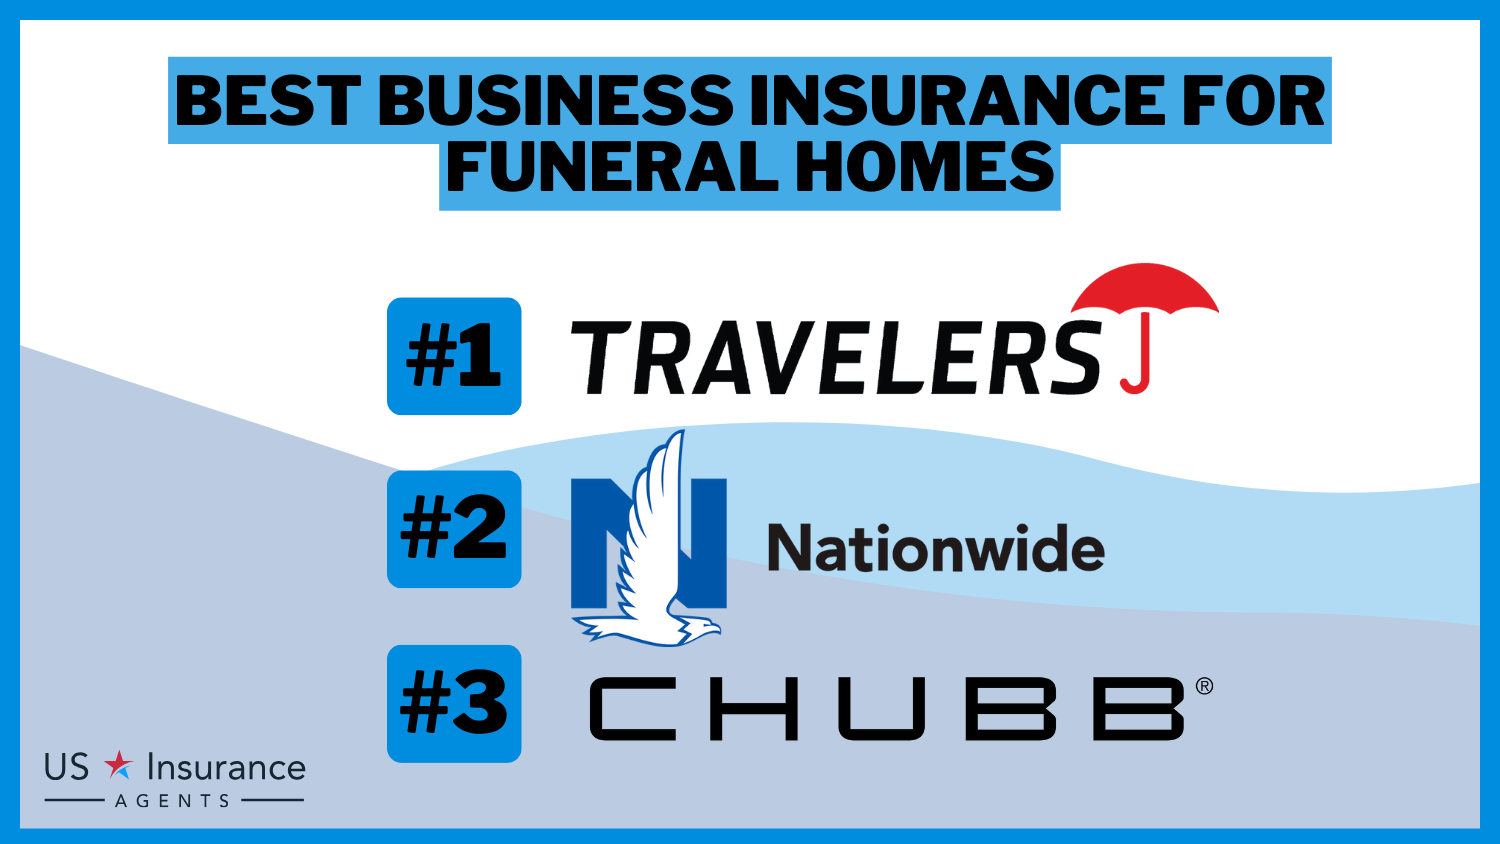 Travelers, Nationwide and Chubb: Best Business Insurance for Funeral Homes